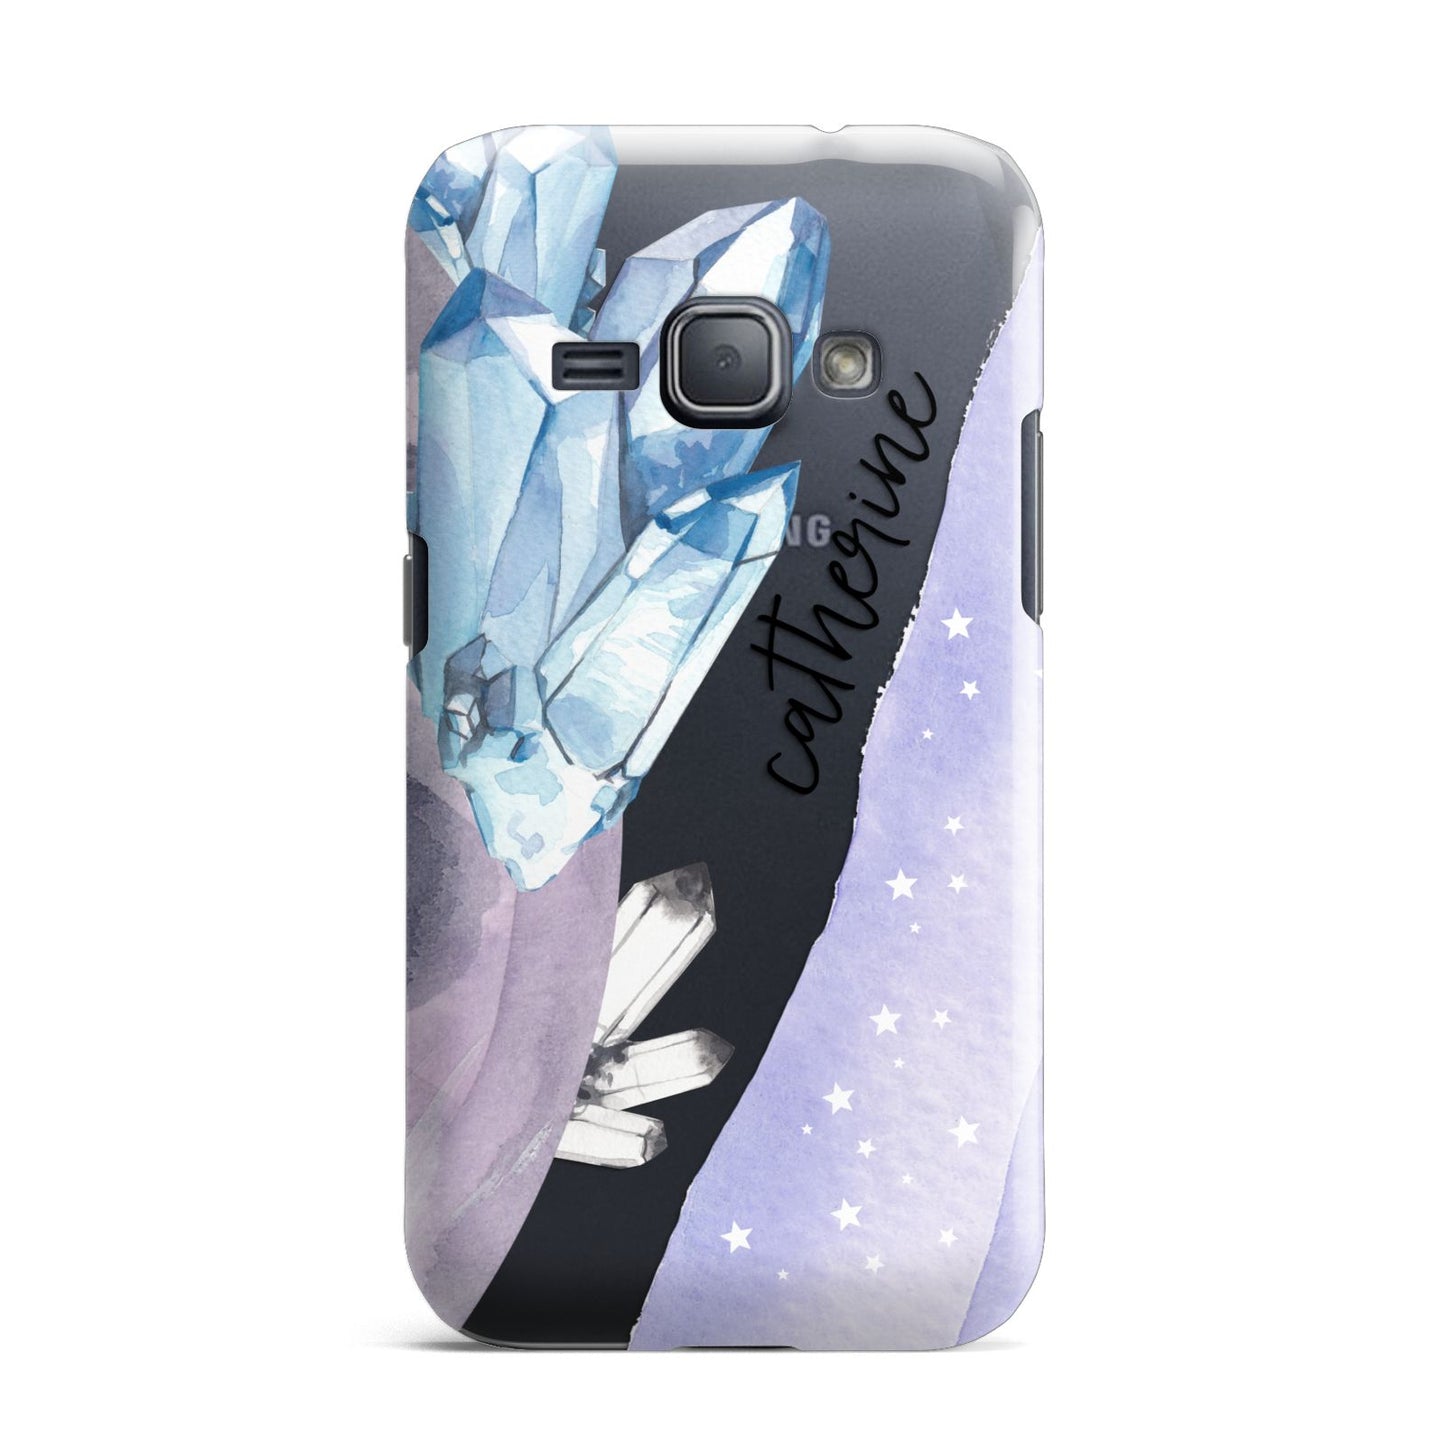 Crystals Personalised Name Samsung Galaxy J1 2016 Case